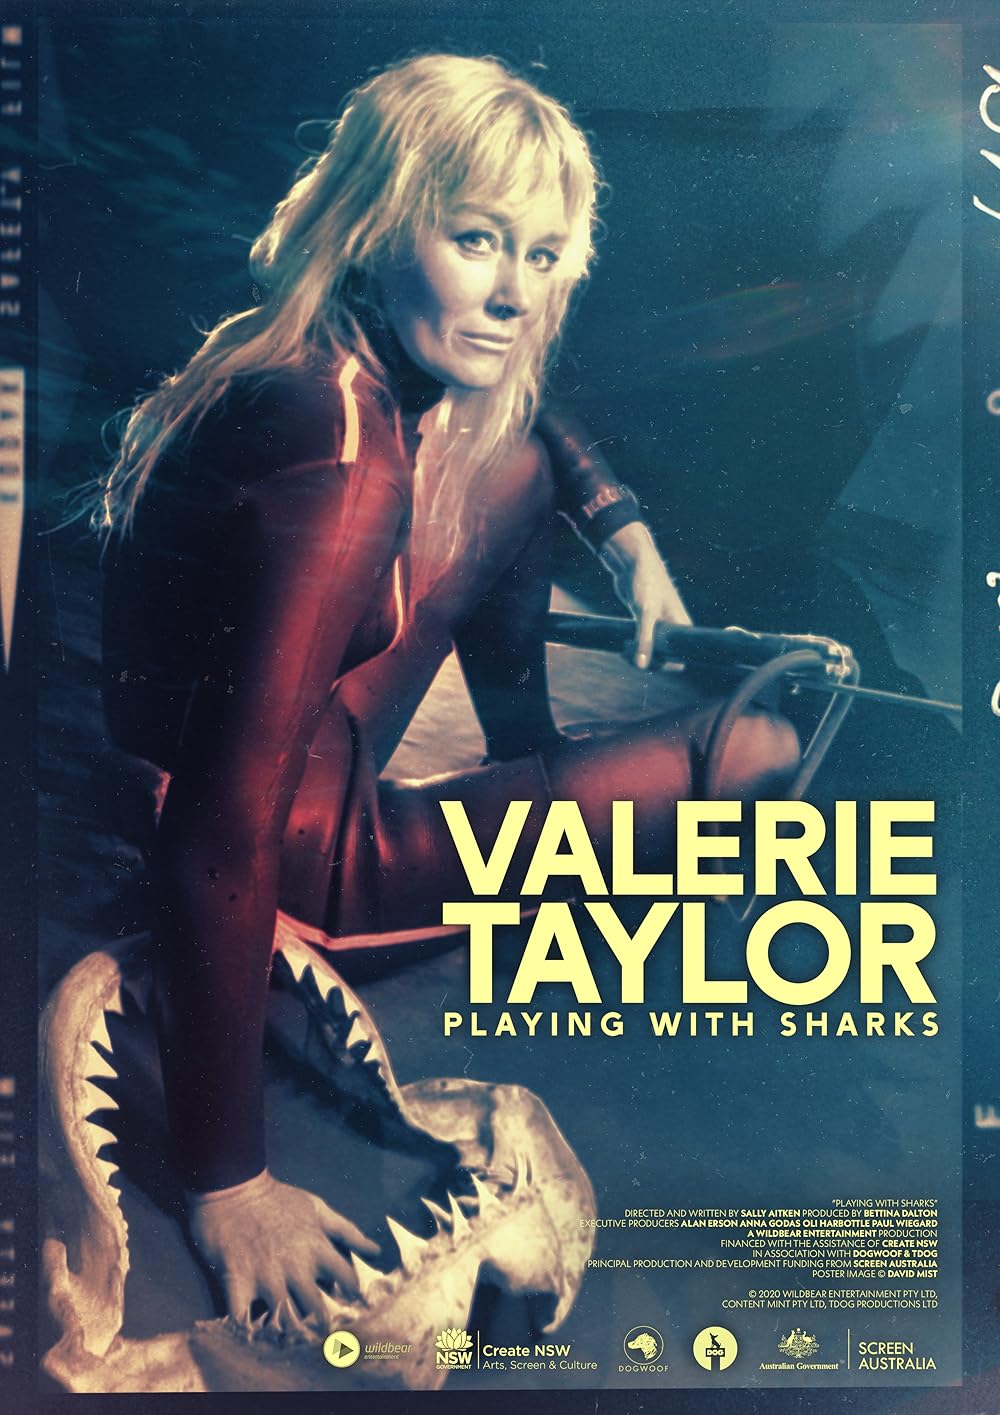 Playing with Sharks: The Valerie Taylor Story (2021) 256Kbps 25Fps 48Khz 5.1Ch Disney+ DD+ E-AC3 Turkish Audio TAC